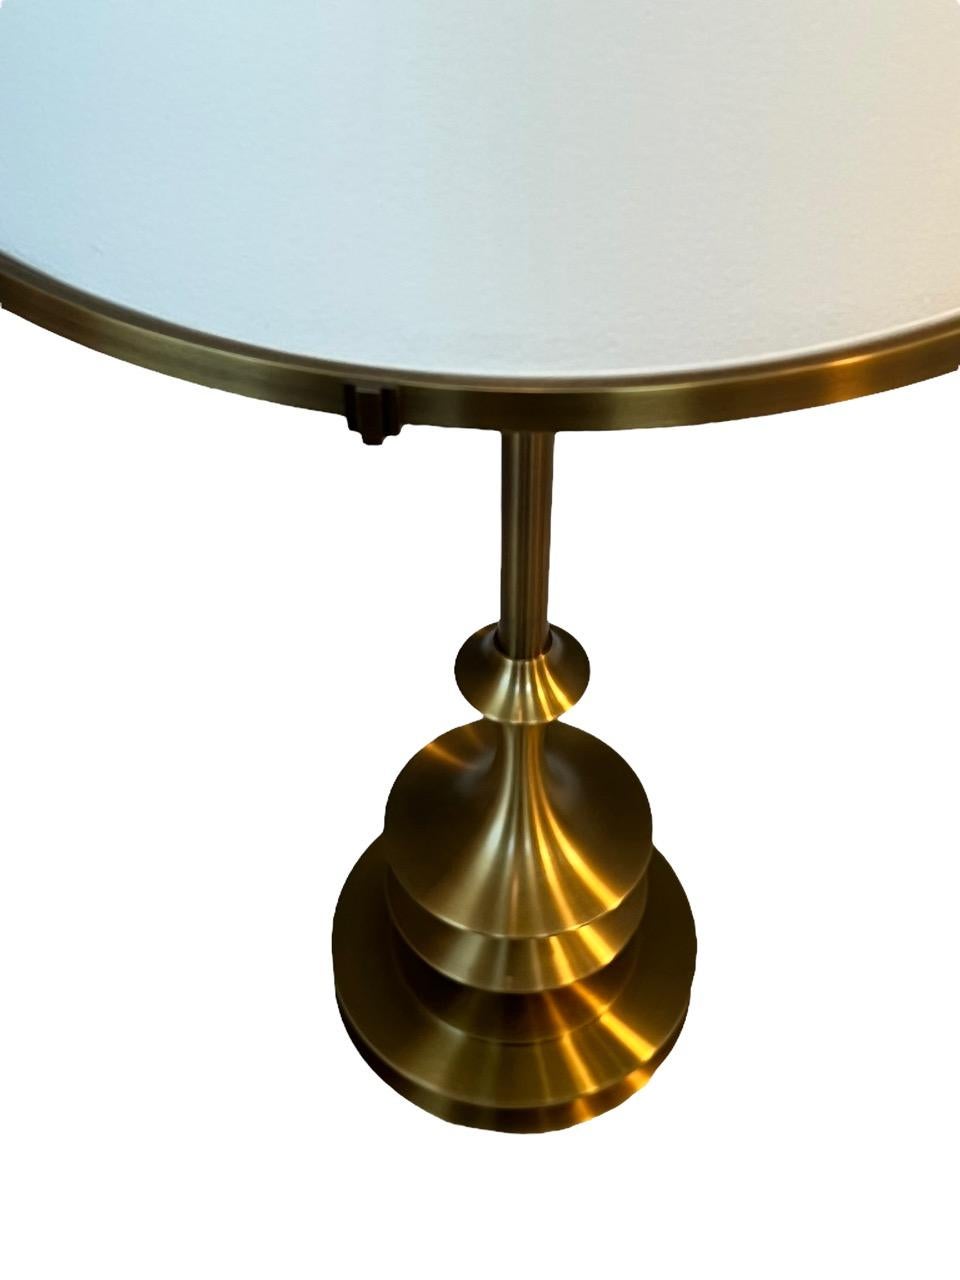 Contemporary Pair of Side Table Lamps, Solid Brass by Designer Solis Betancourt 7